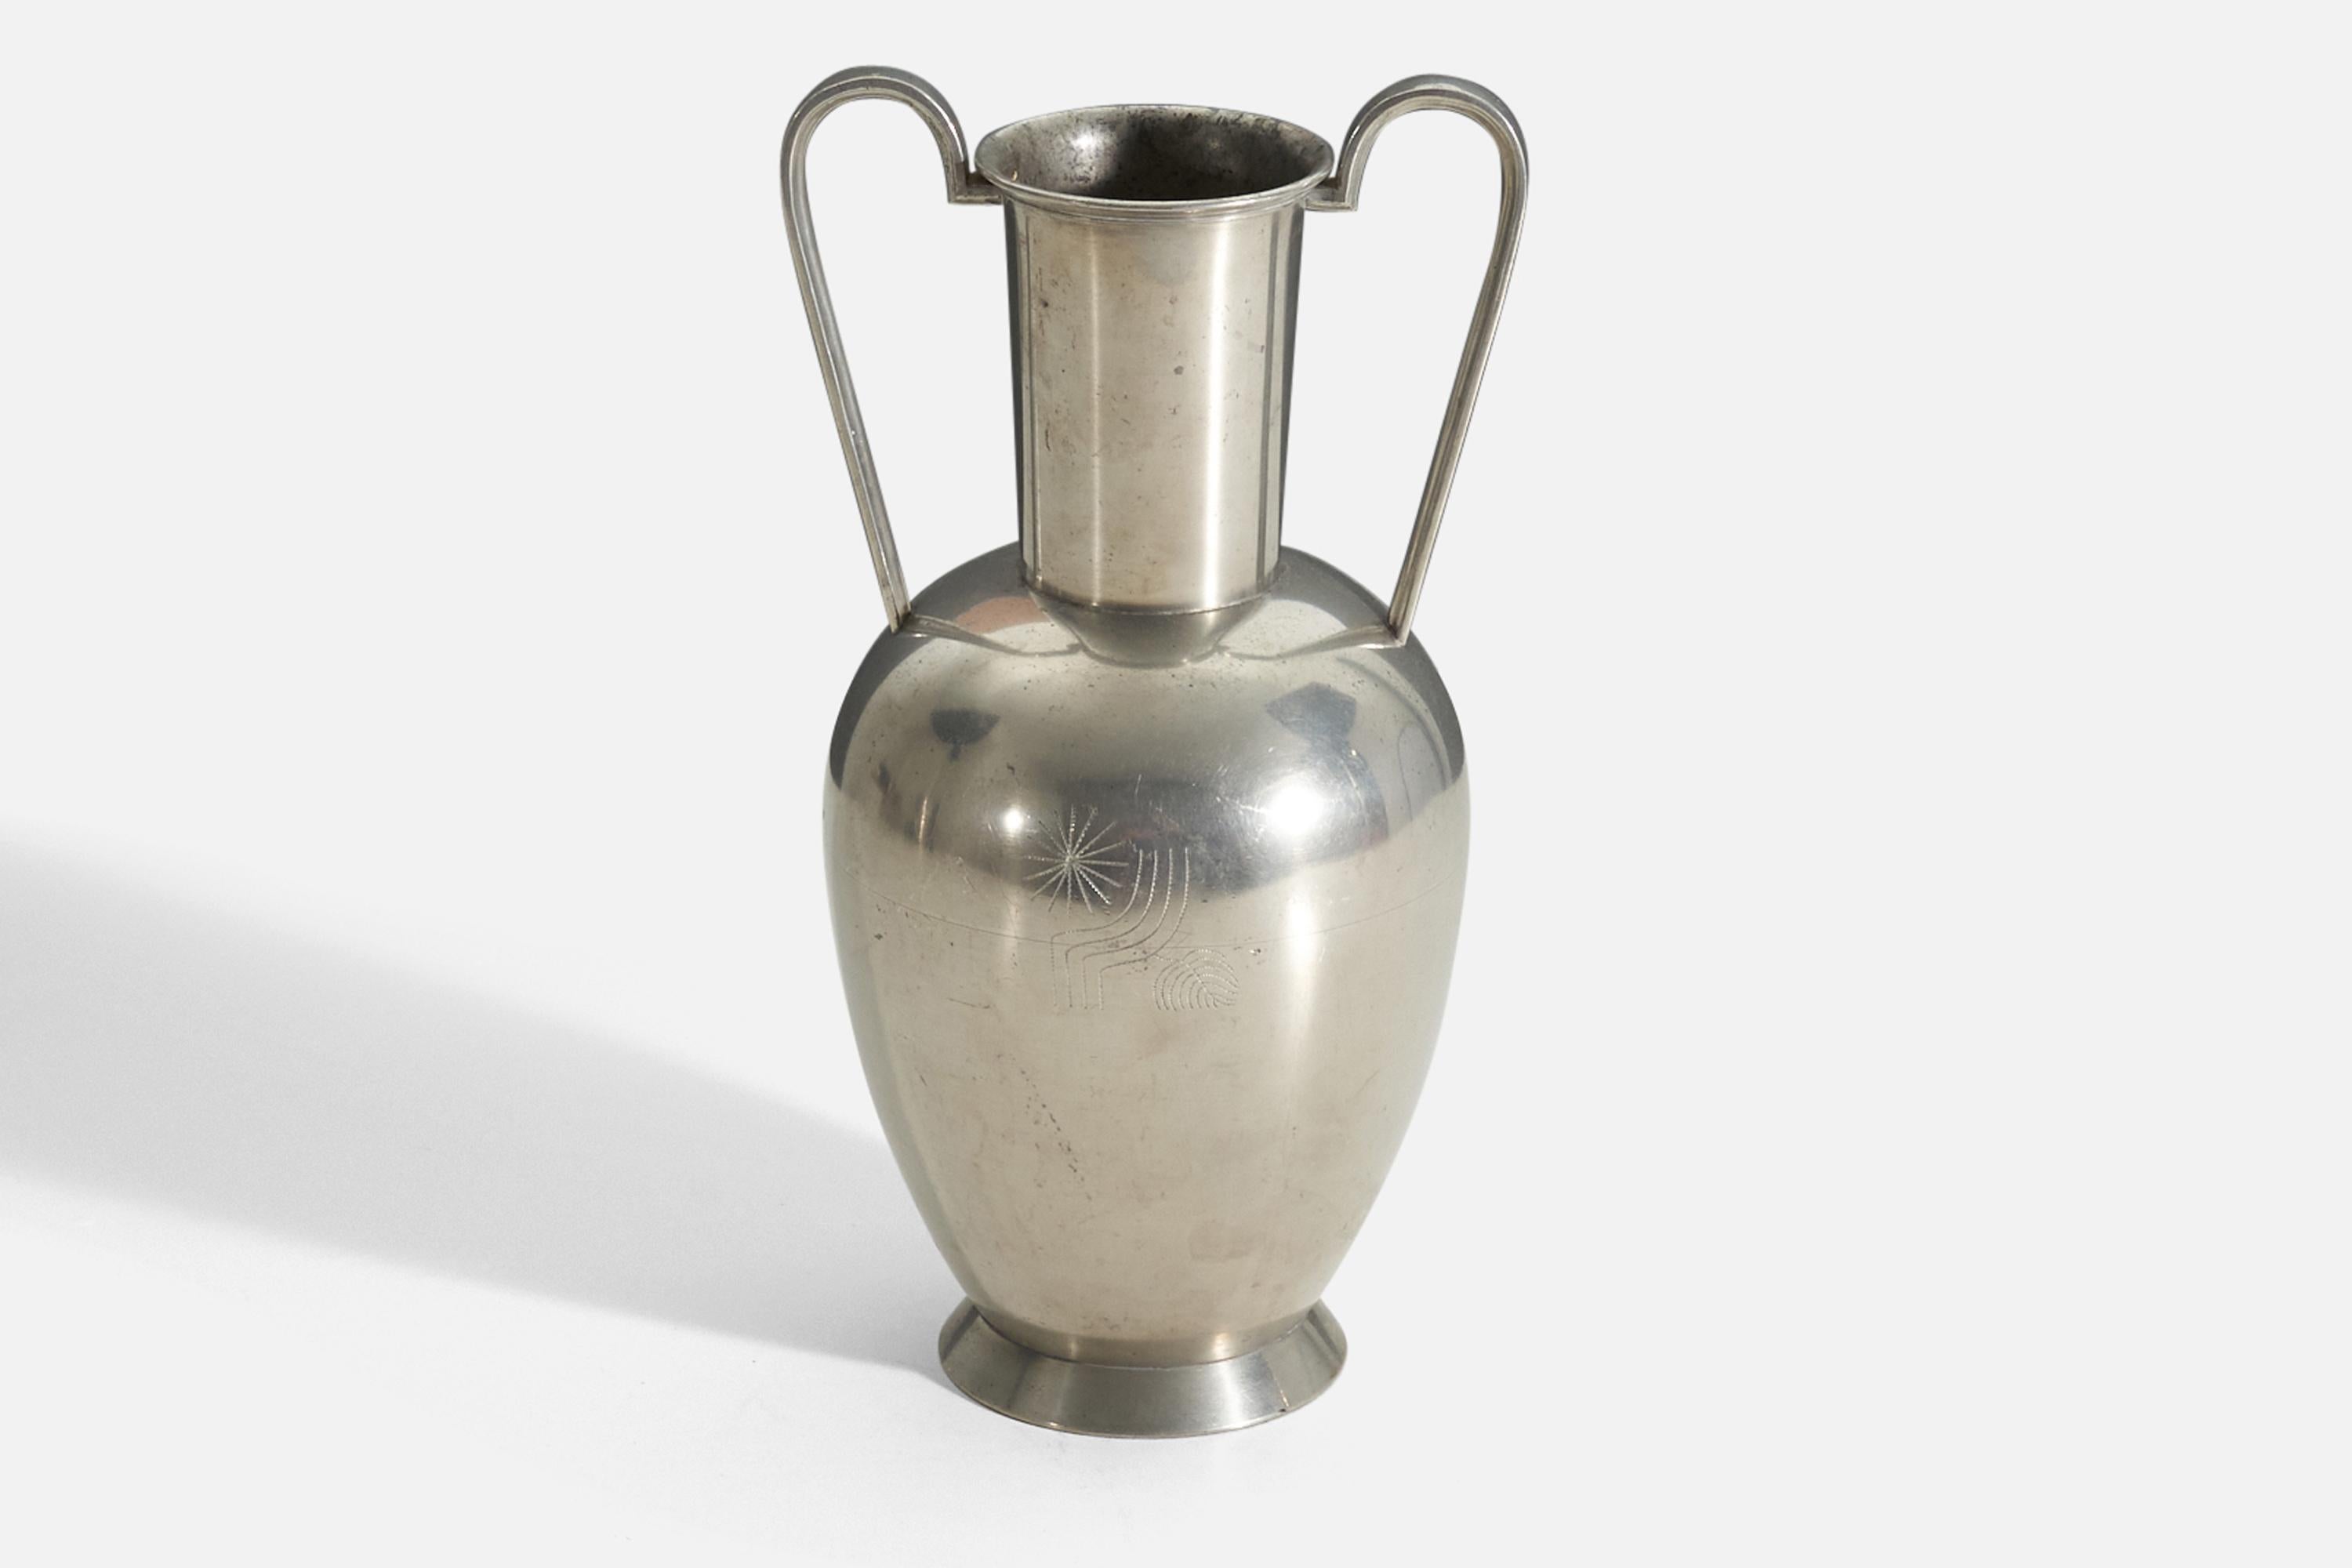 A vase / vessel / trophy in cast pewter featuring engravings from 1935. Stamped with the Svenskt Tenn maker's mark.
 